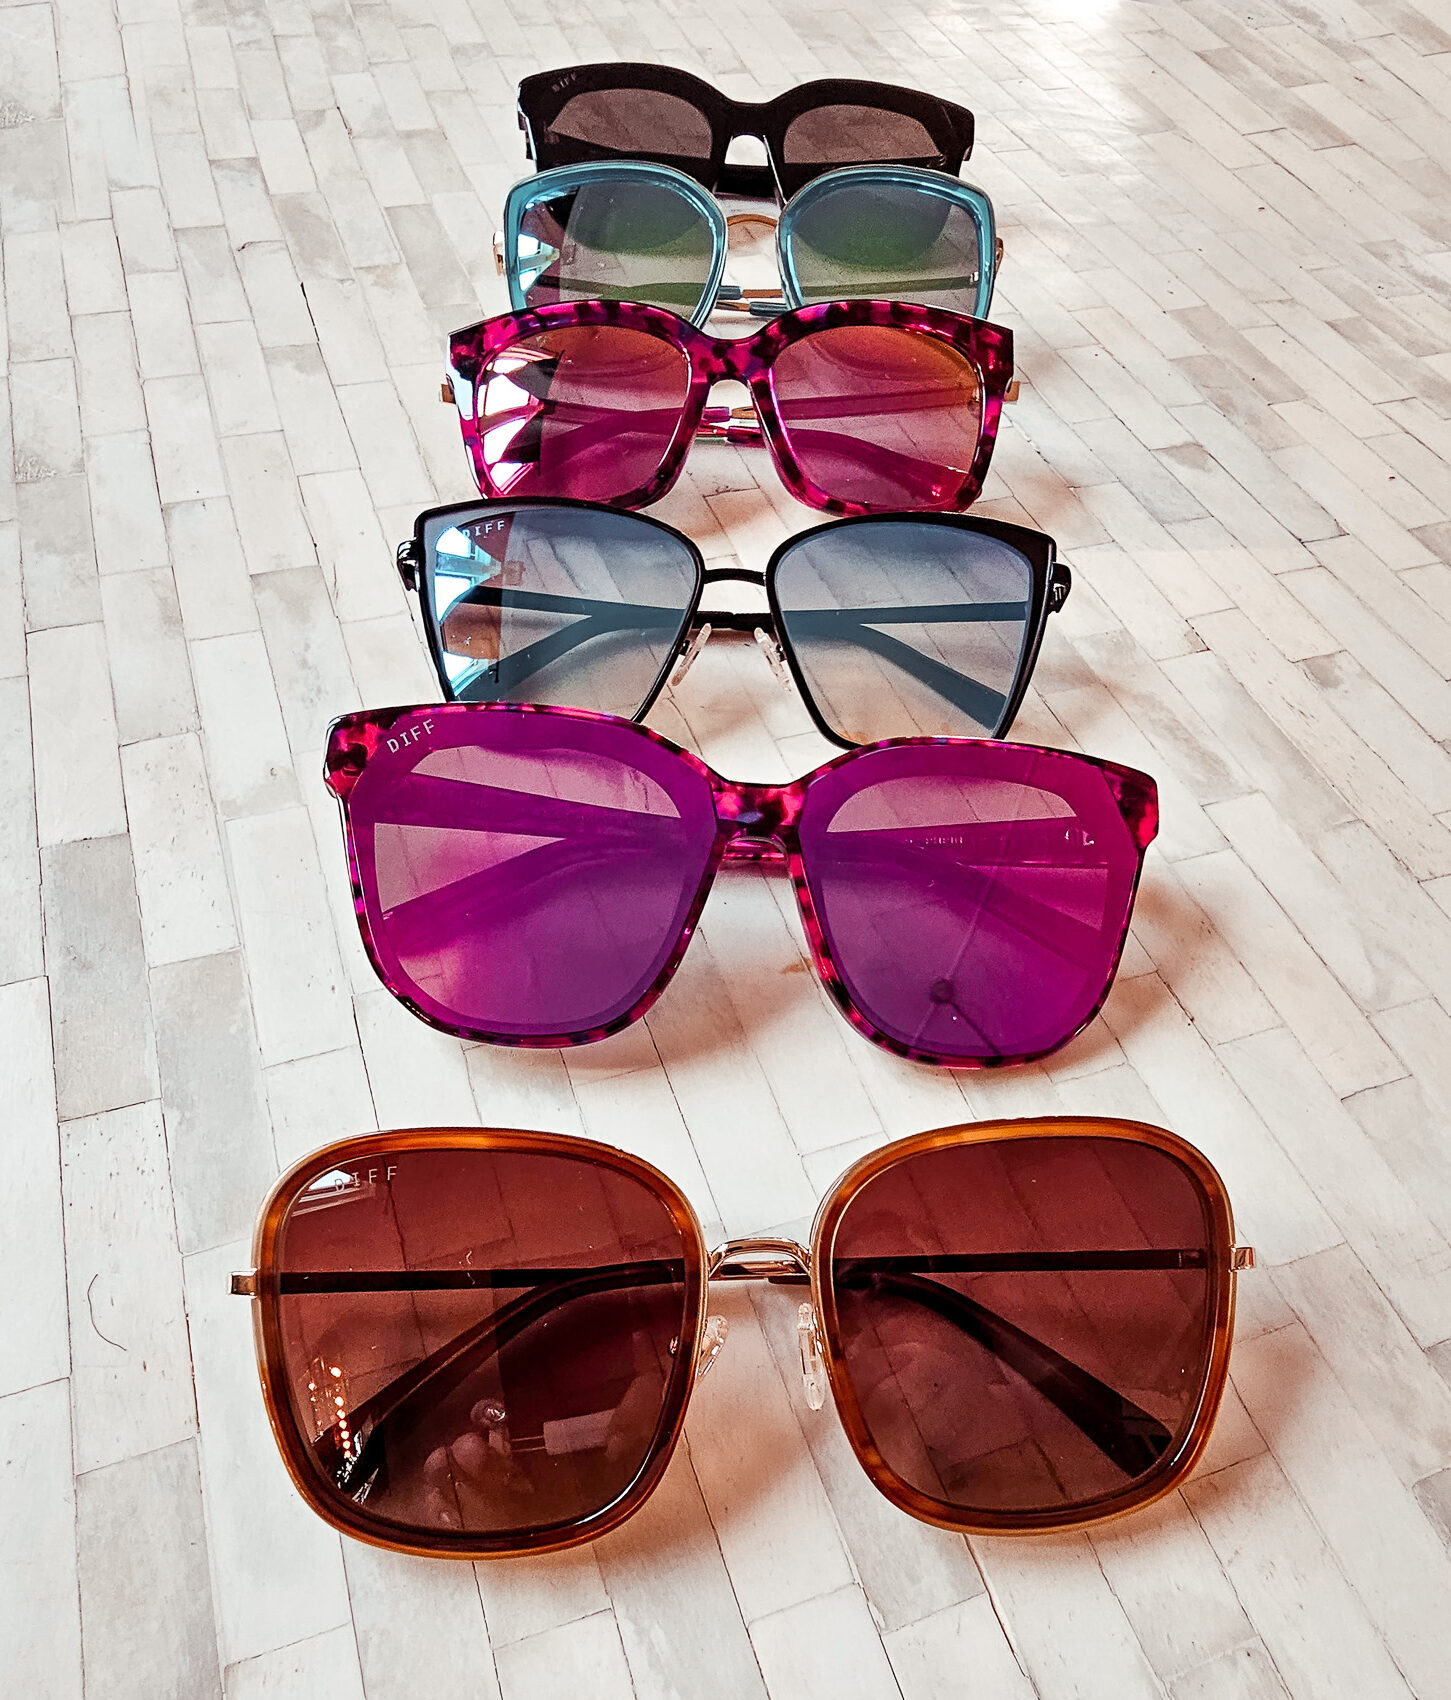 Picture of 6 Diff sunglasses we carry, the first pair is black, then blue, then pink, black again (different pair),  pink again (different pair) and then brown